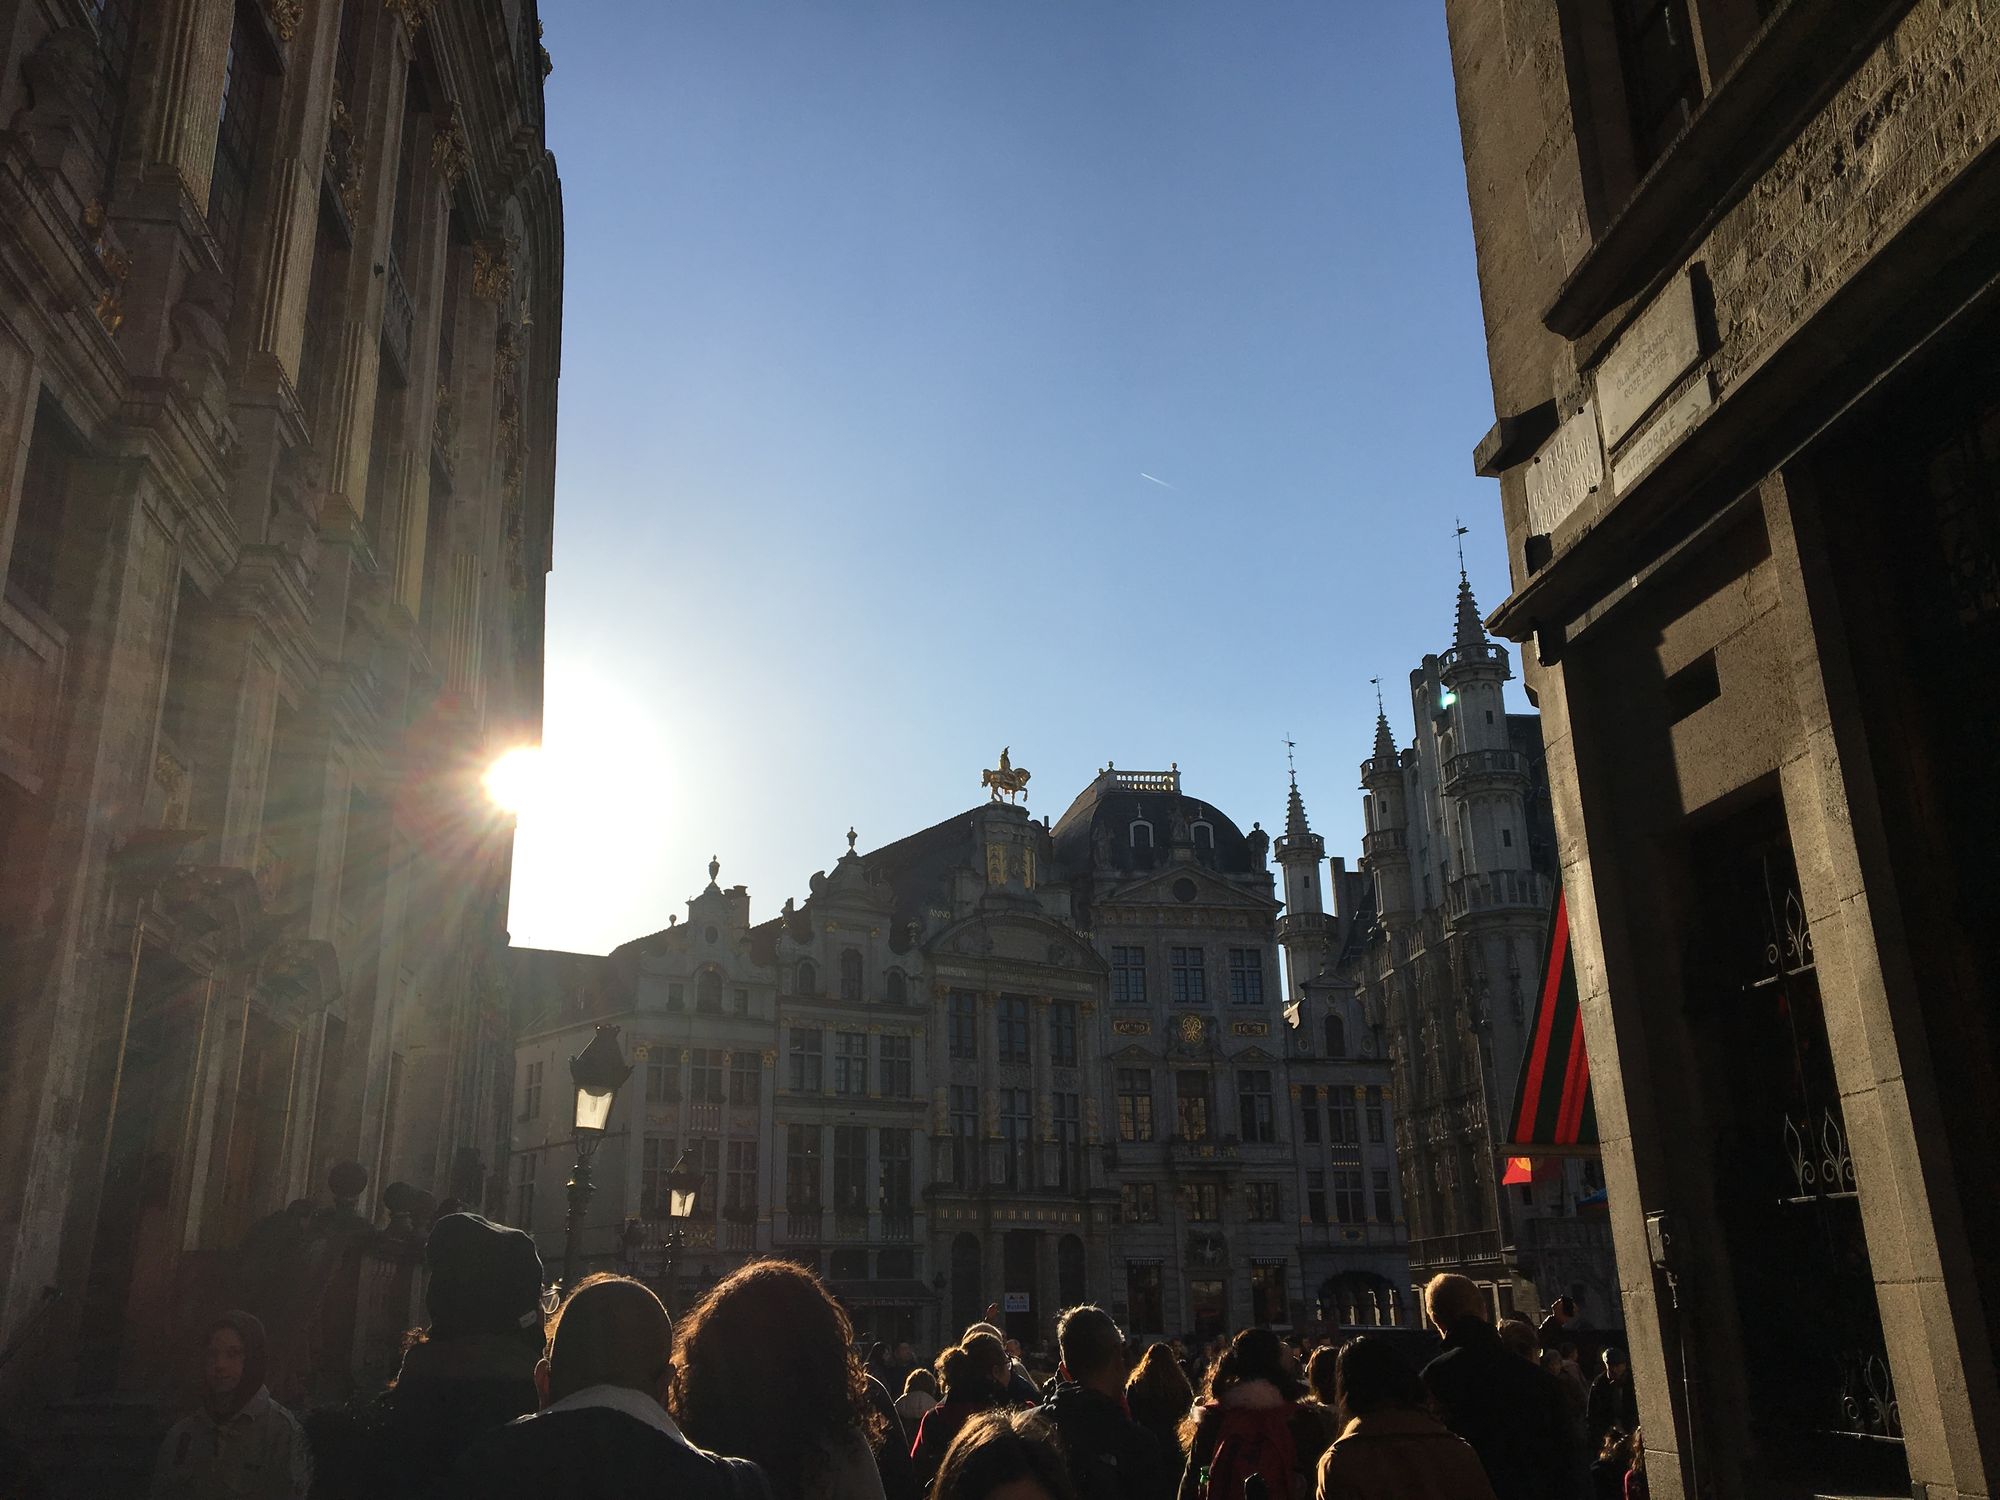 A photo of a crowd flowing into The Grand Place square